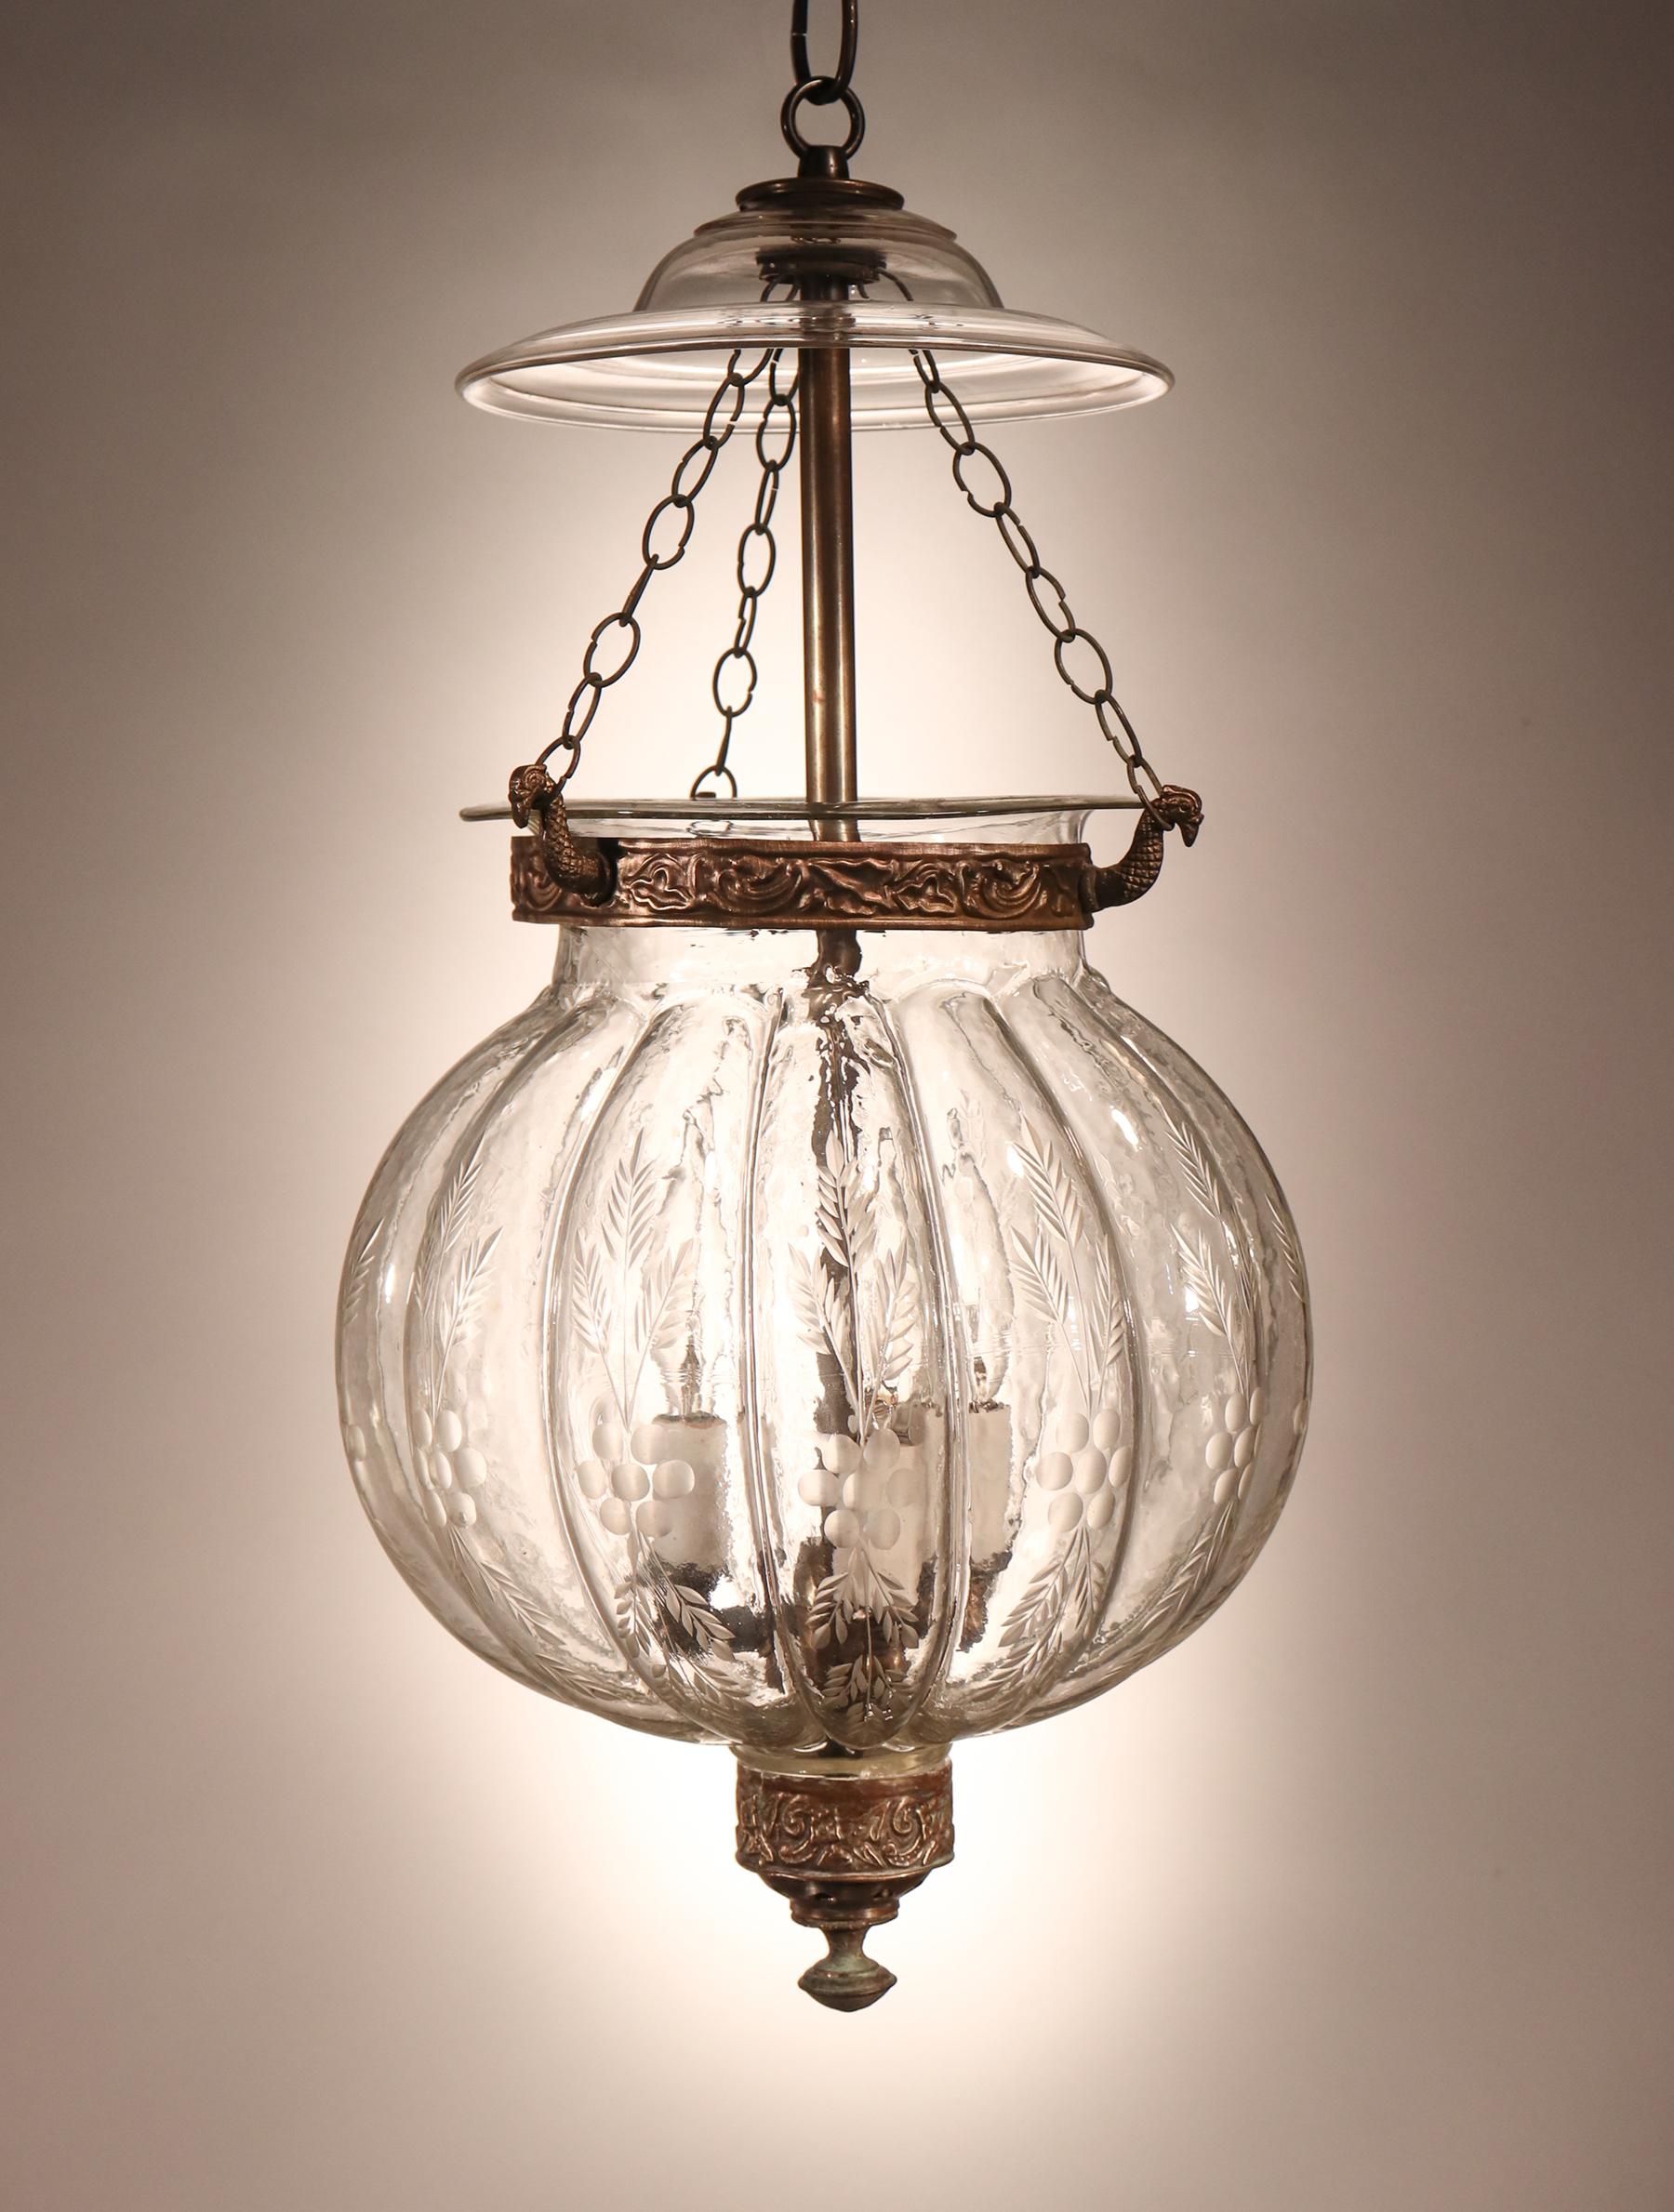 An antique etched melon- or pumpkin-shaped bell jar lantern from Belgium, circa 1890. The quality of the lantern's hand blown glass is very good, with several desirable air bubbles and swirls in the jar. The smoke bell/lid, brass finial, and brass